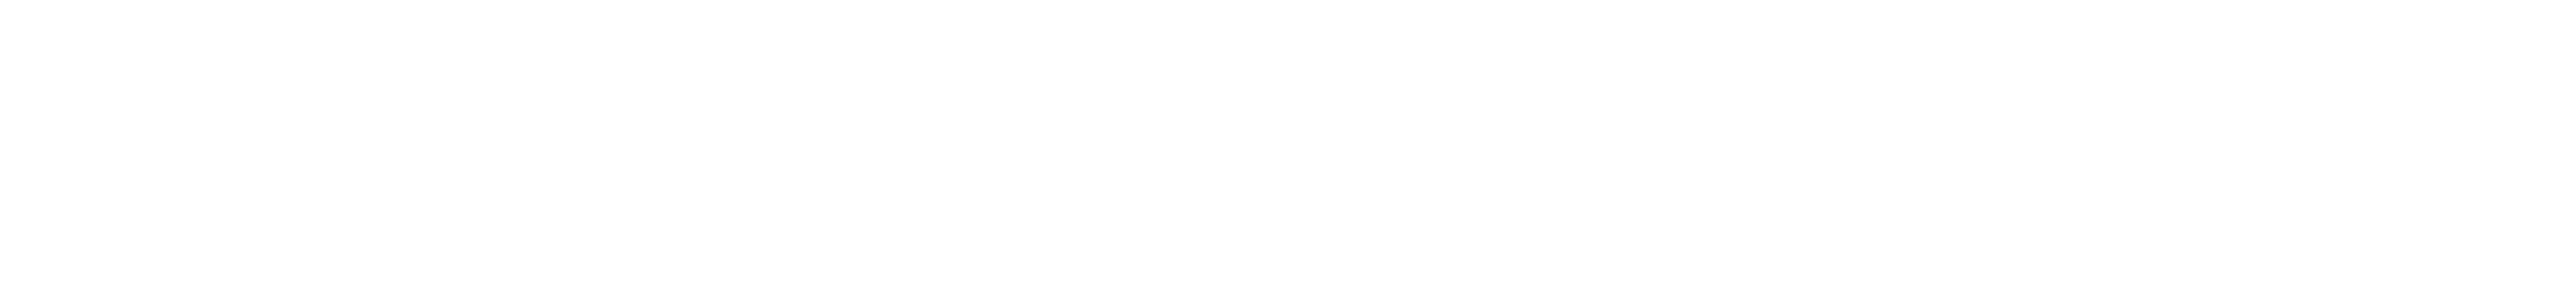 Pathfinder: A Canadian Journal for Information Science Students and Early Career Professionals.